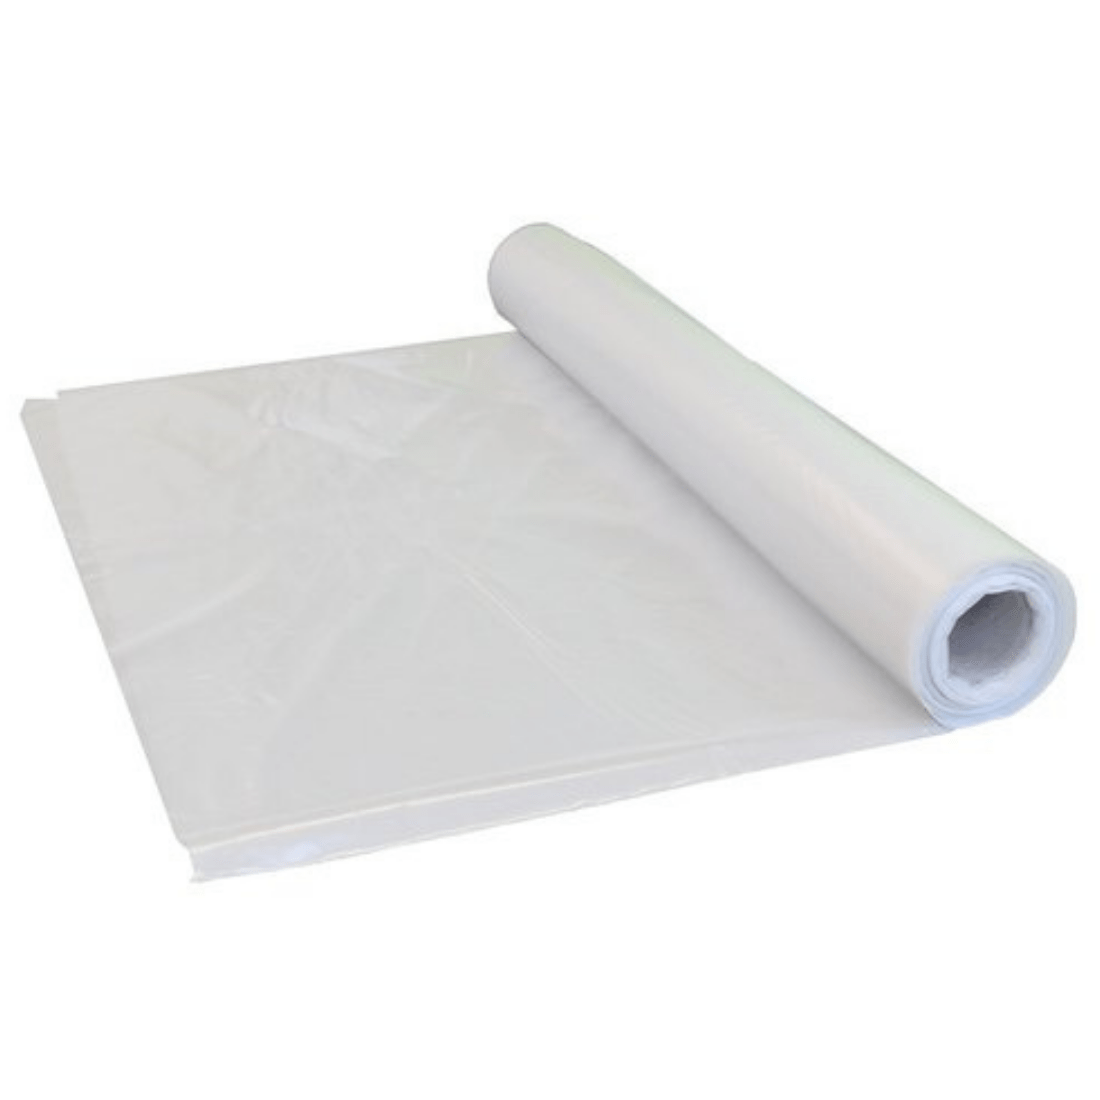 Screeds Direct Building Materials 4m x 25m x 500g (100sqm) Clear Polythene Vapour Control Layer